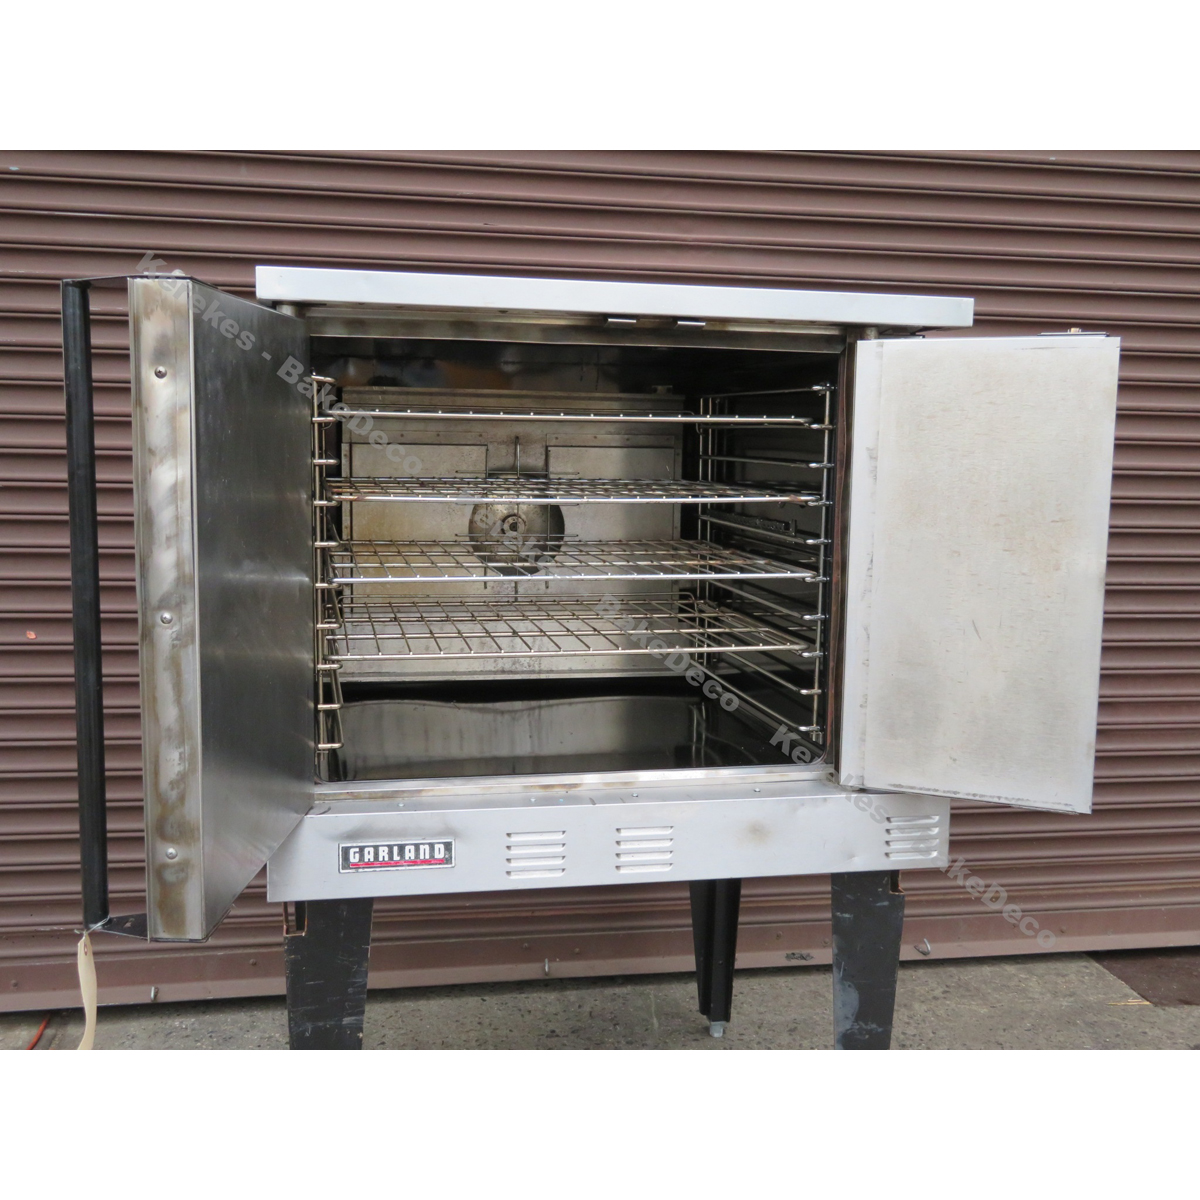 Garland MCO-GS-10-A Gas Convection Oven, Used Excellent Condition image 2